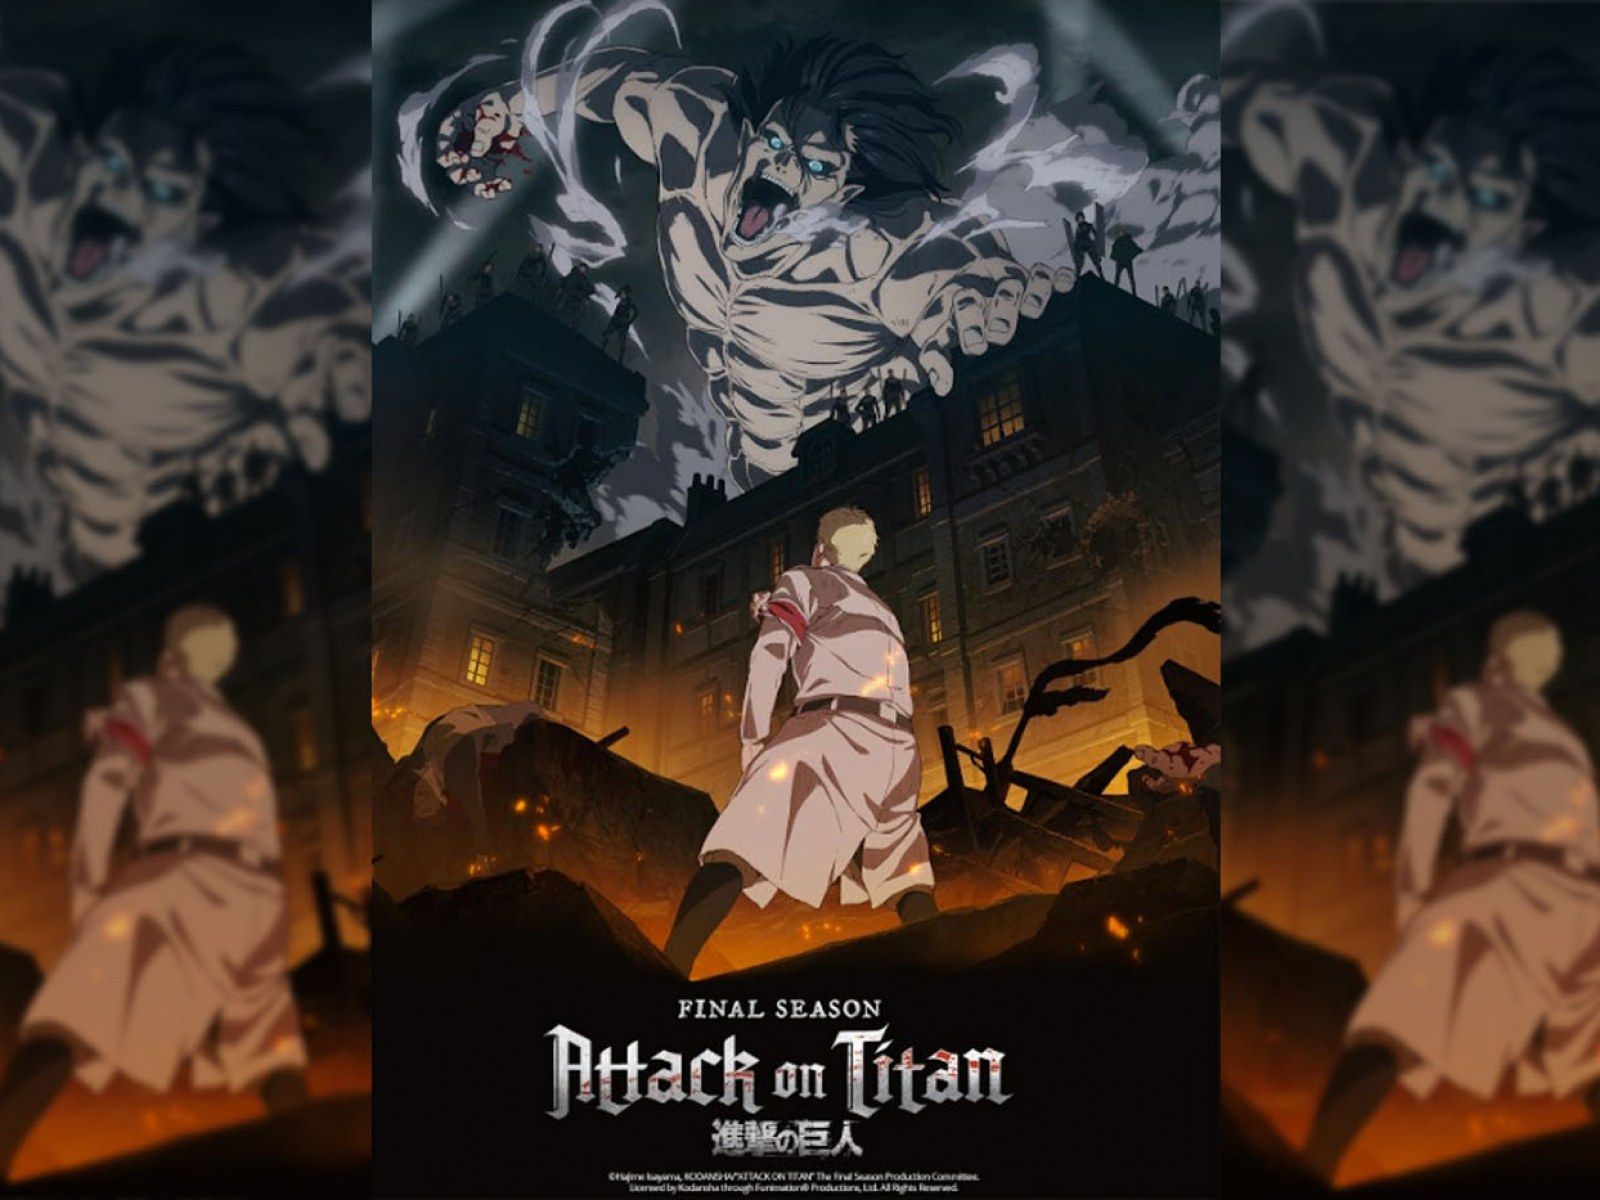 Attack on Titan' Season Episode 2 Release Date and How to Watch Online